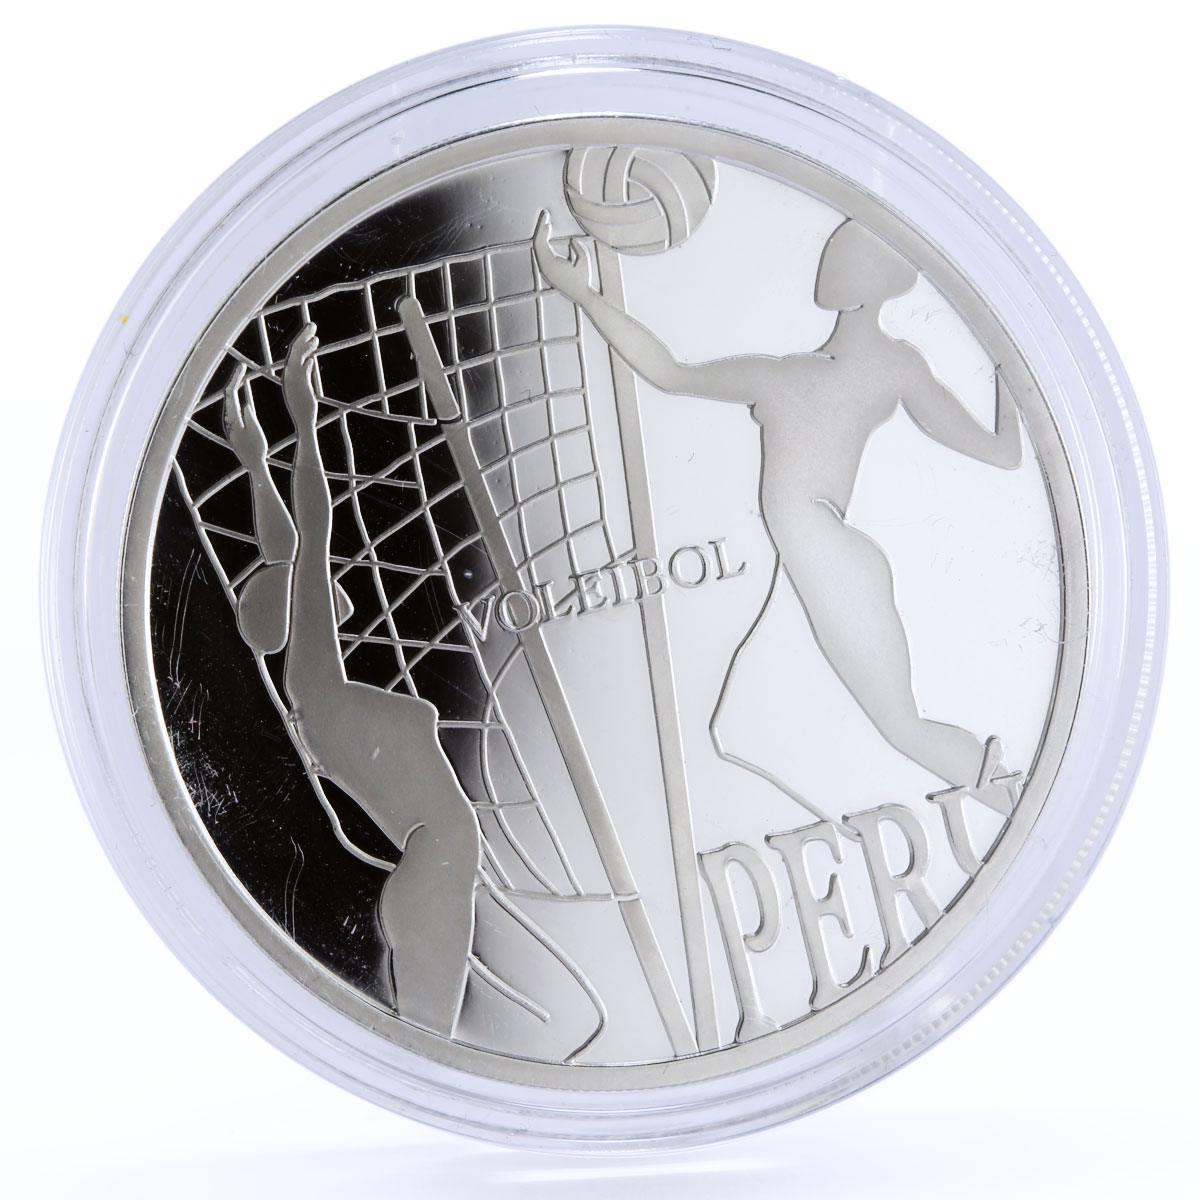 Peru 1 sol Olympic Sports Games Volleyball proof silver coin 2007